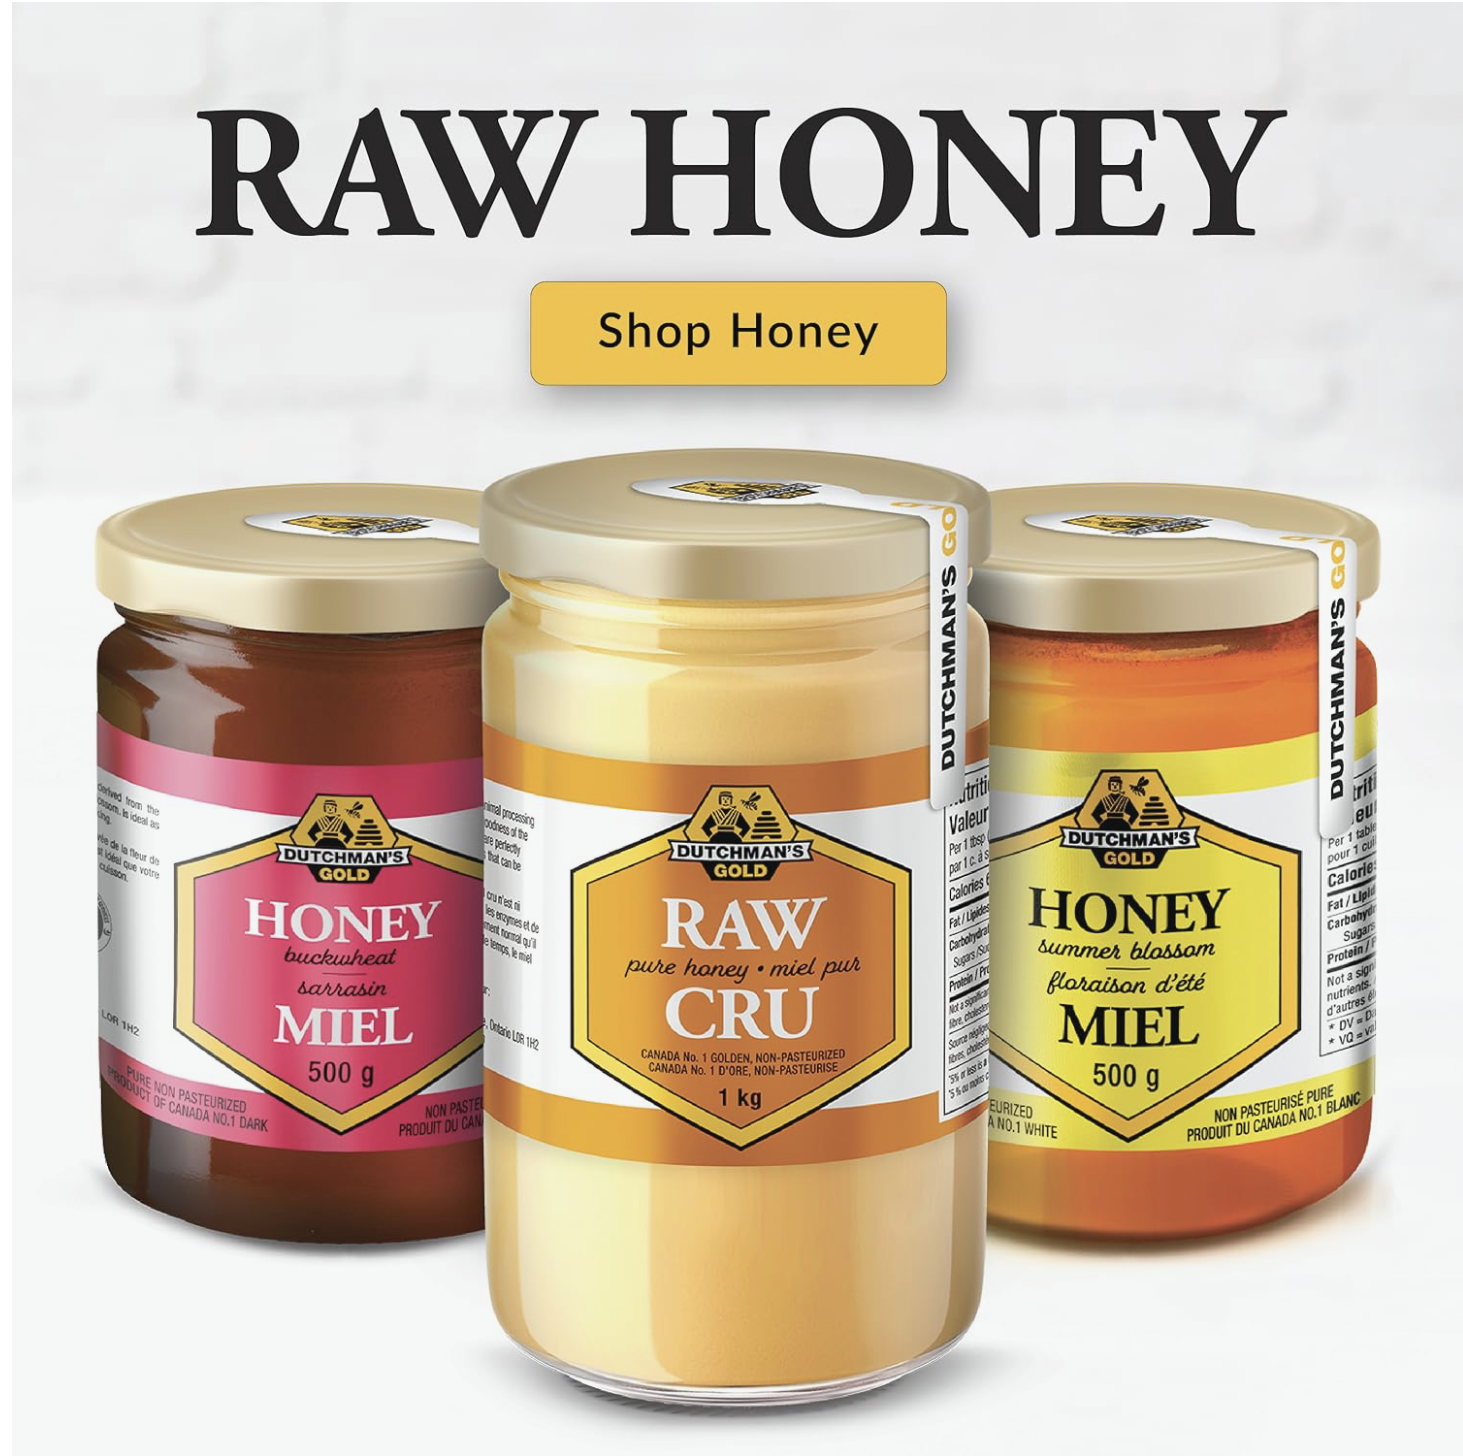 Raw Honey from Dutchman's Gold